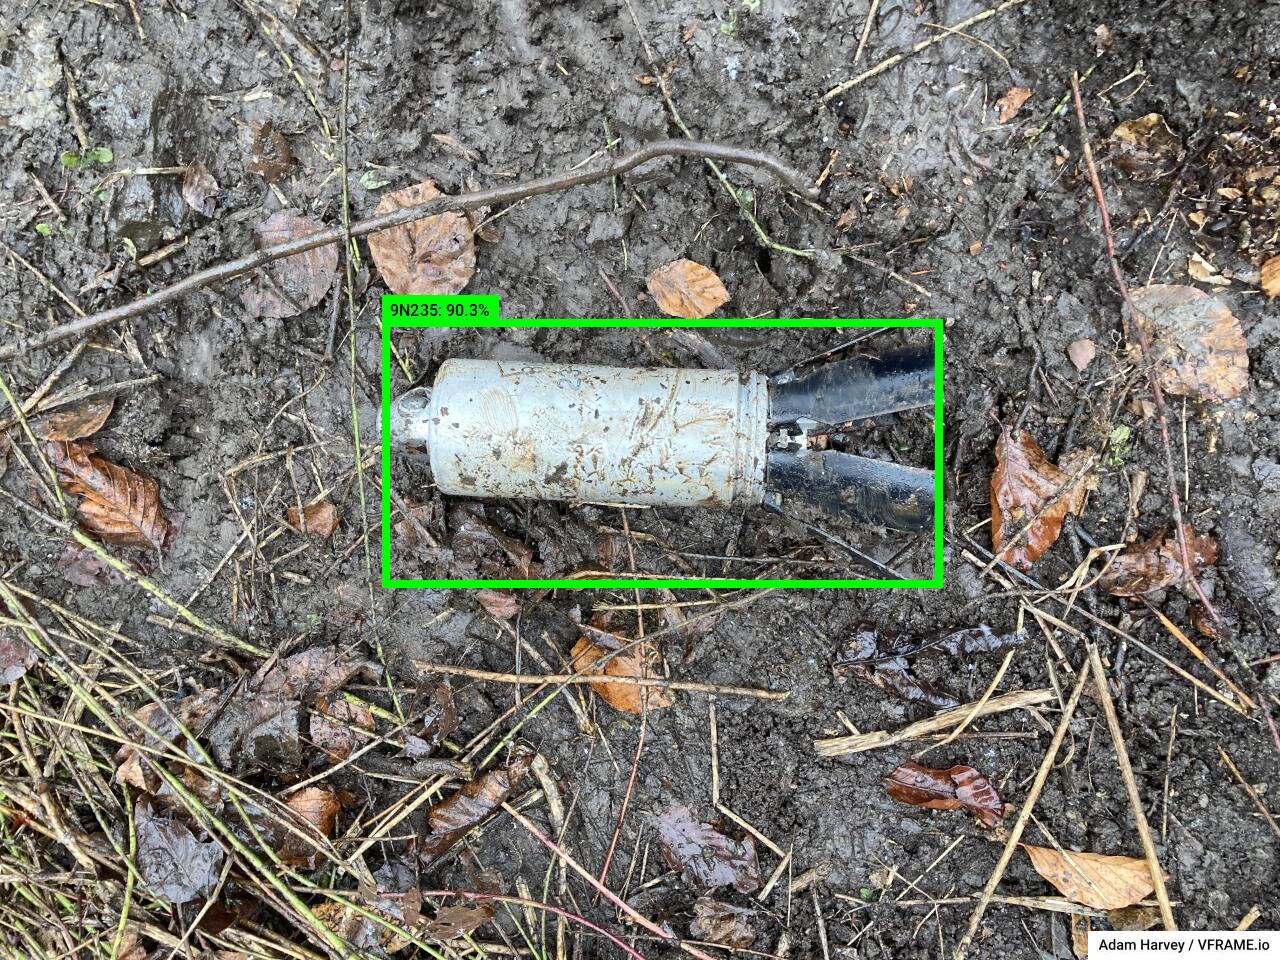 A free from explosive (FFE) 9N235/9N210 submunition photographed at close range in wet forest terrain